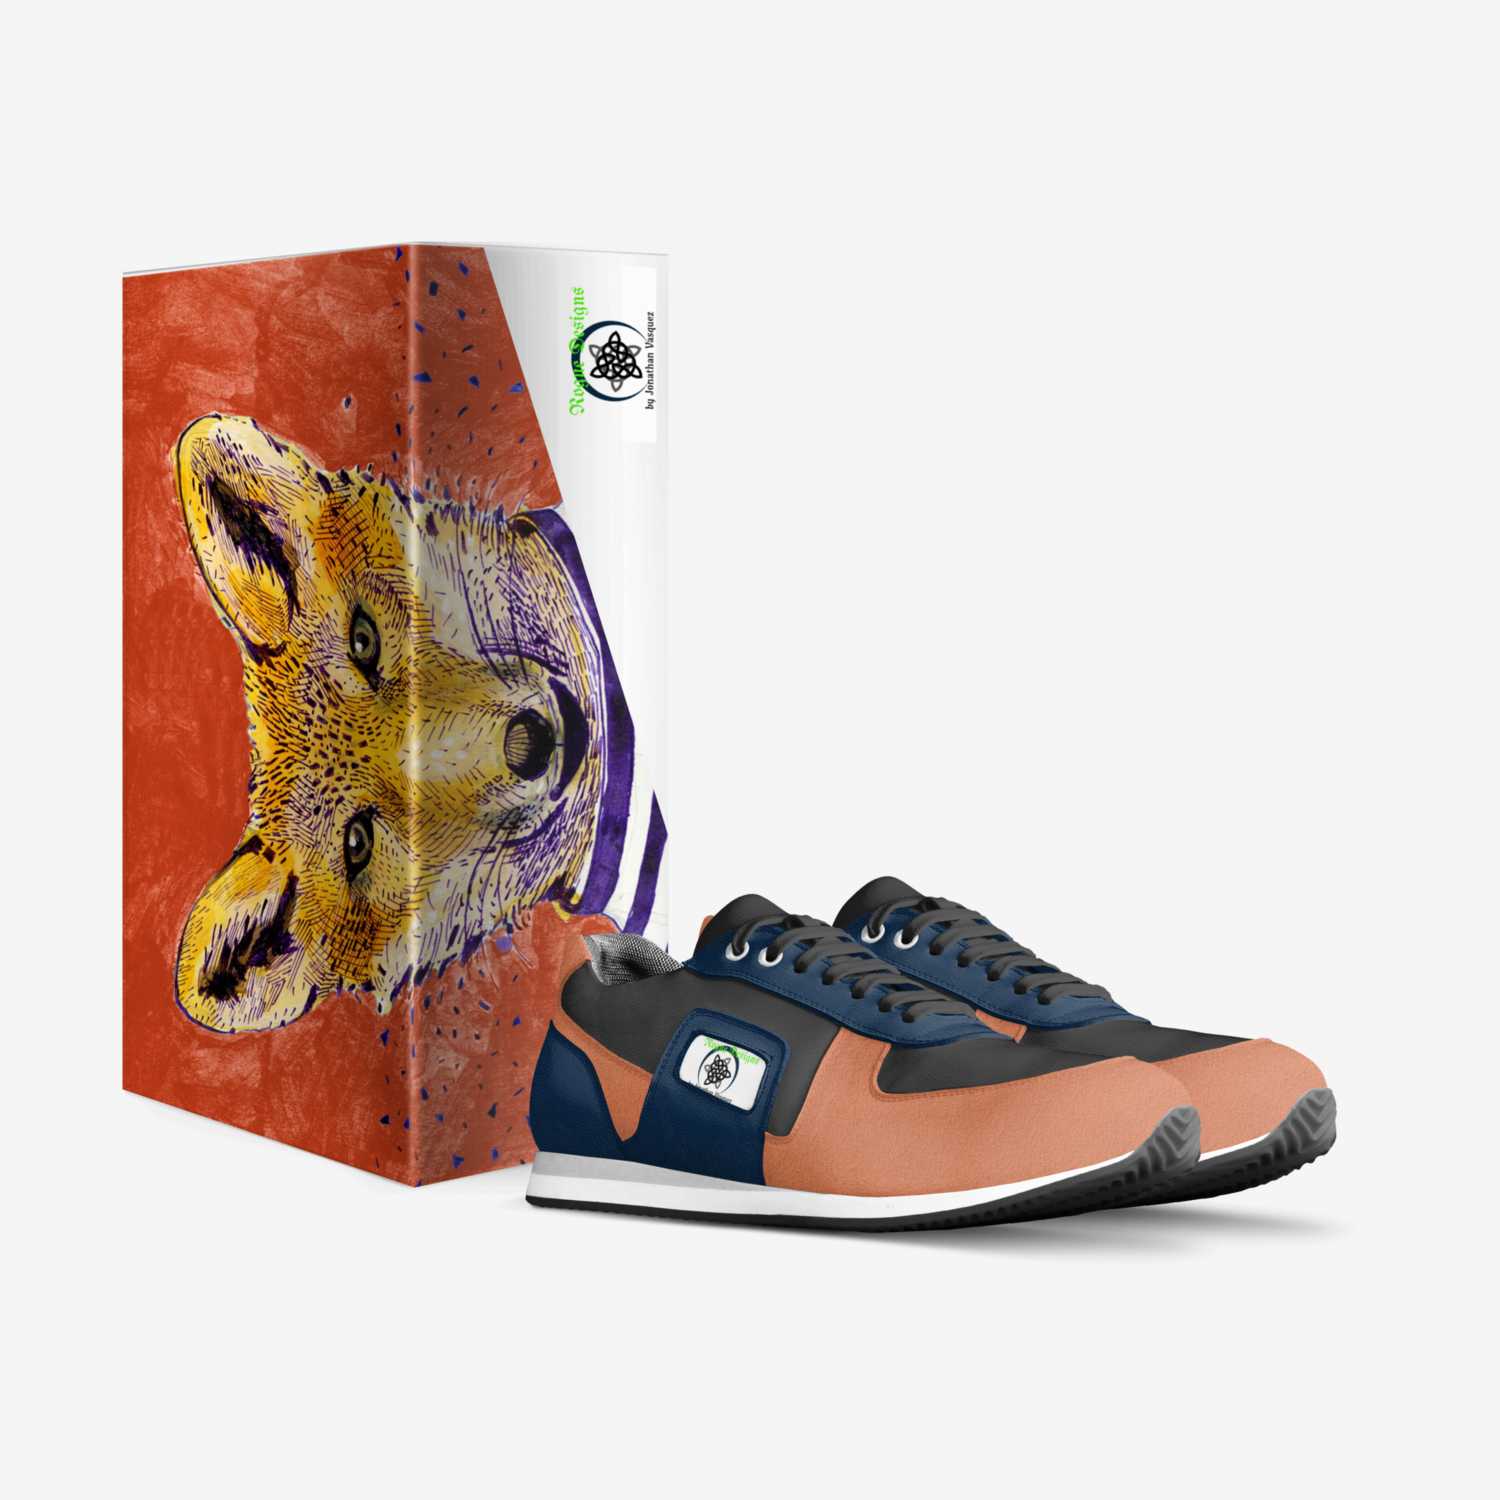 nine tails custom made in Italy shoes by Jonathan Vasquez | Box view